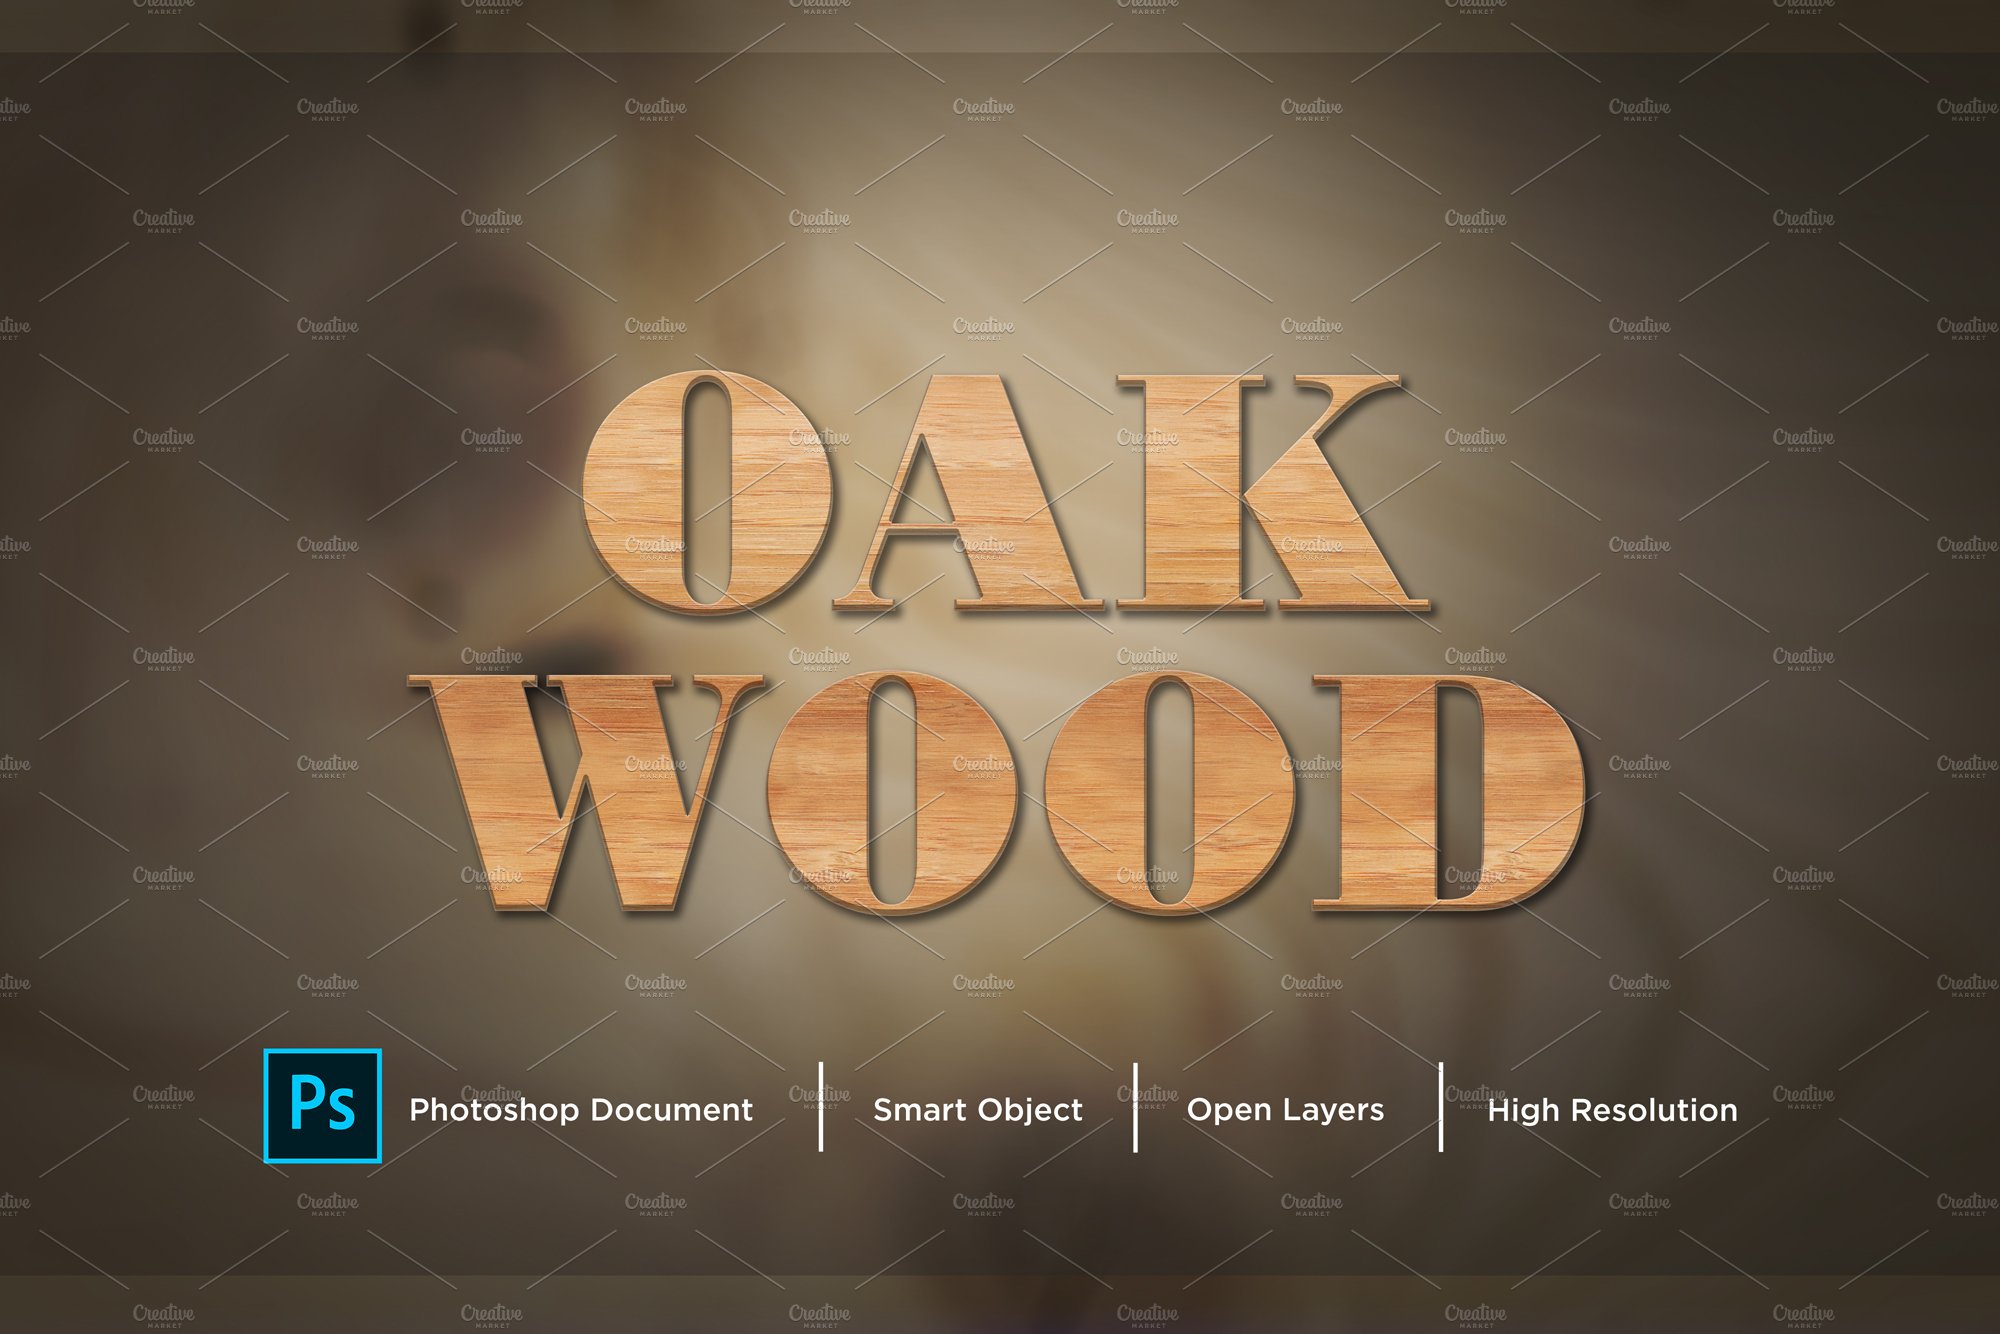 Oak wood Text Effect & Layer Stylecover image.